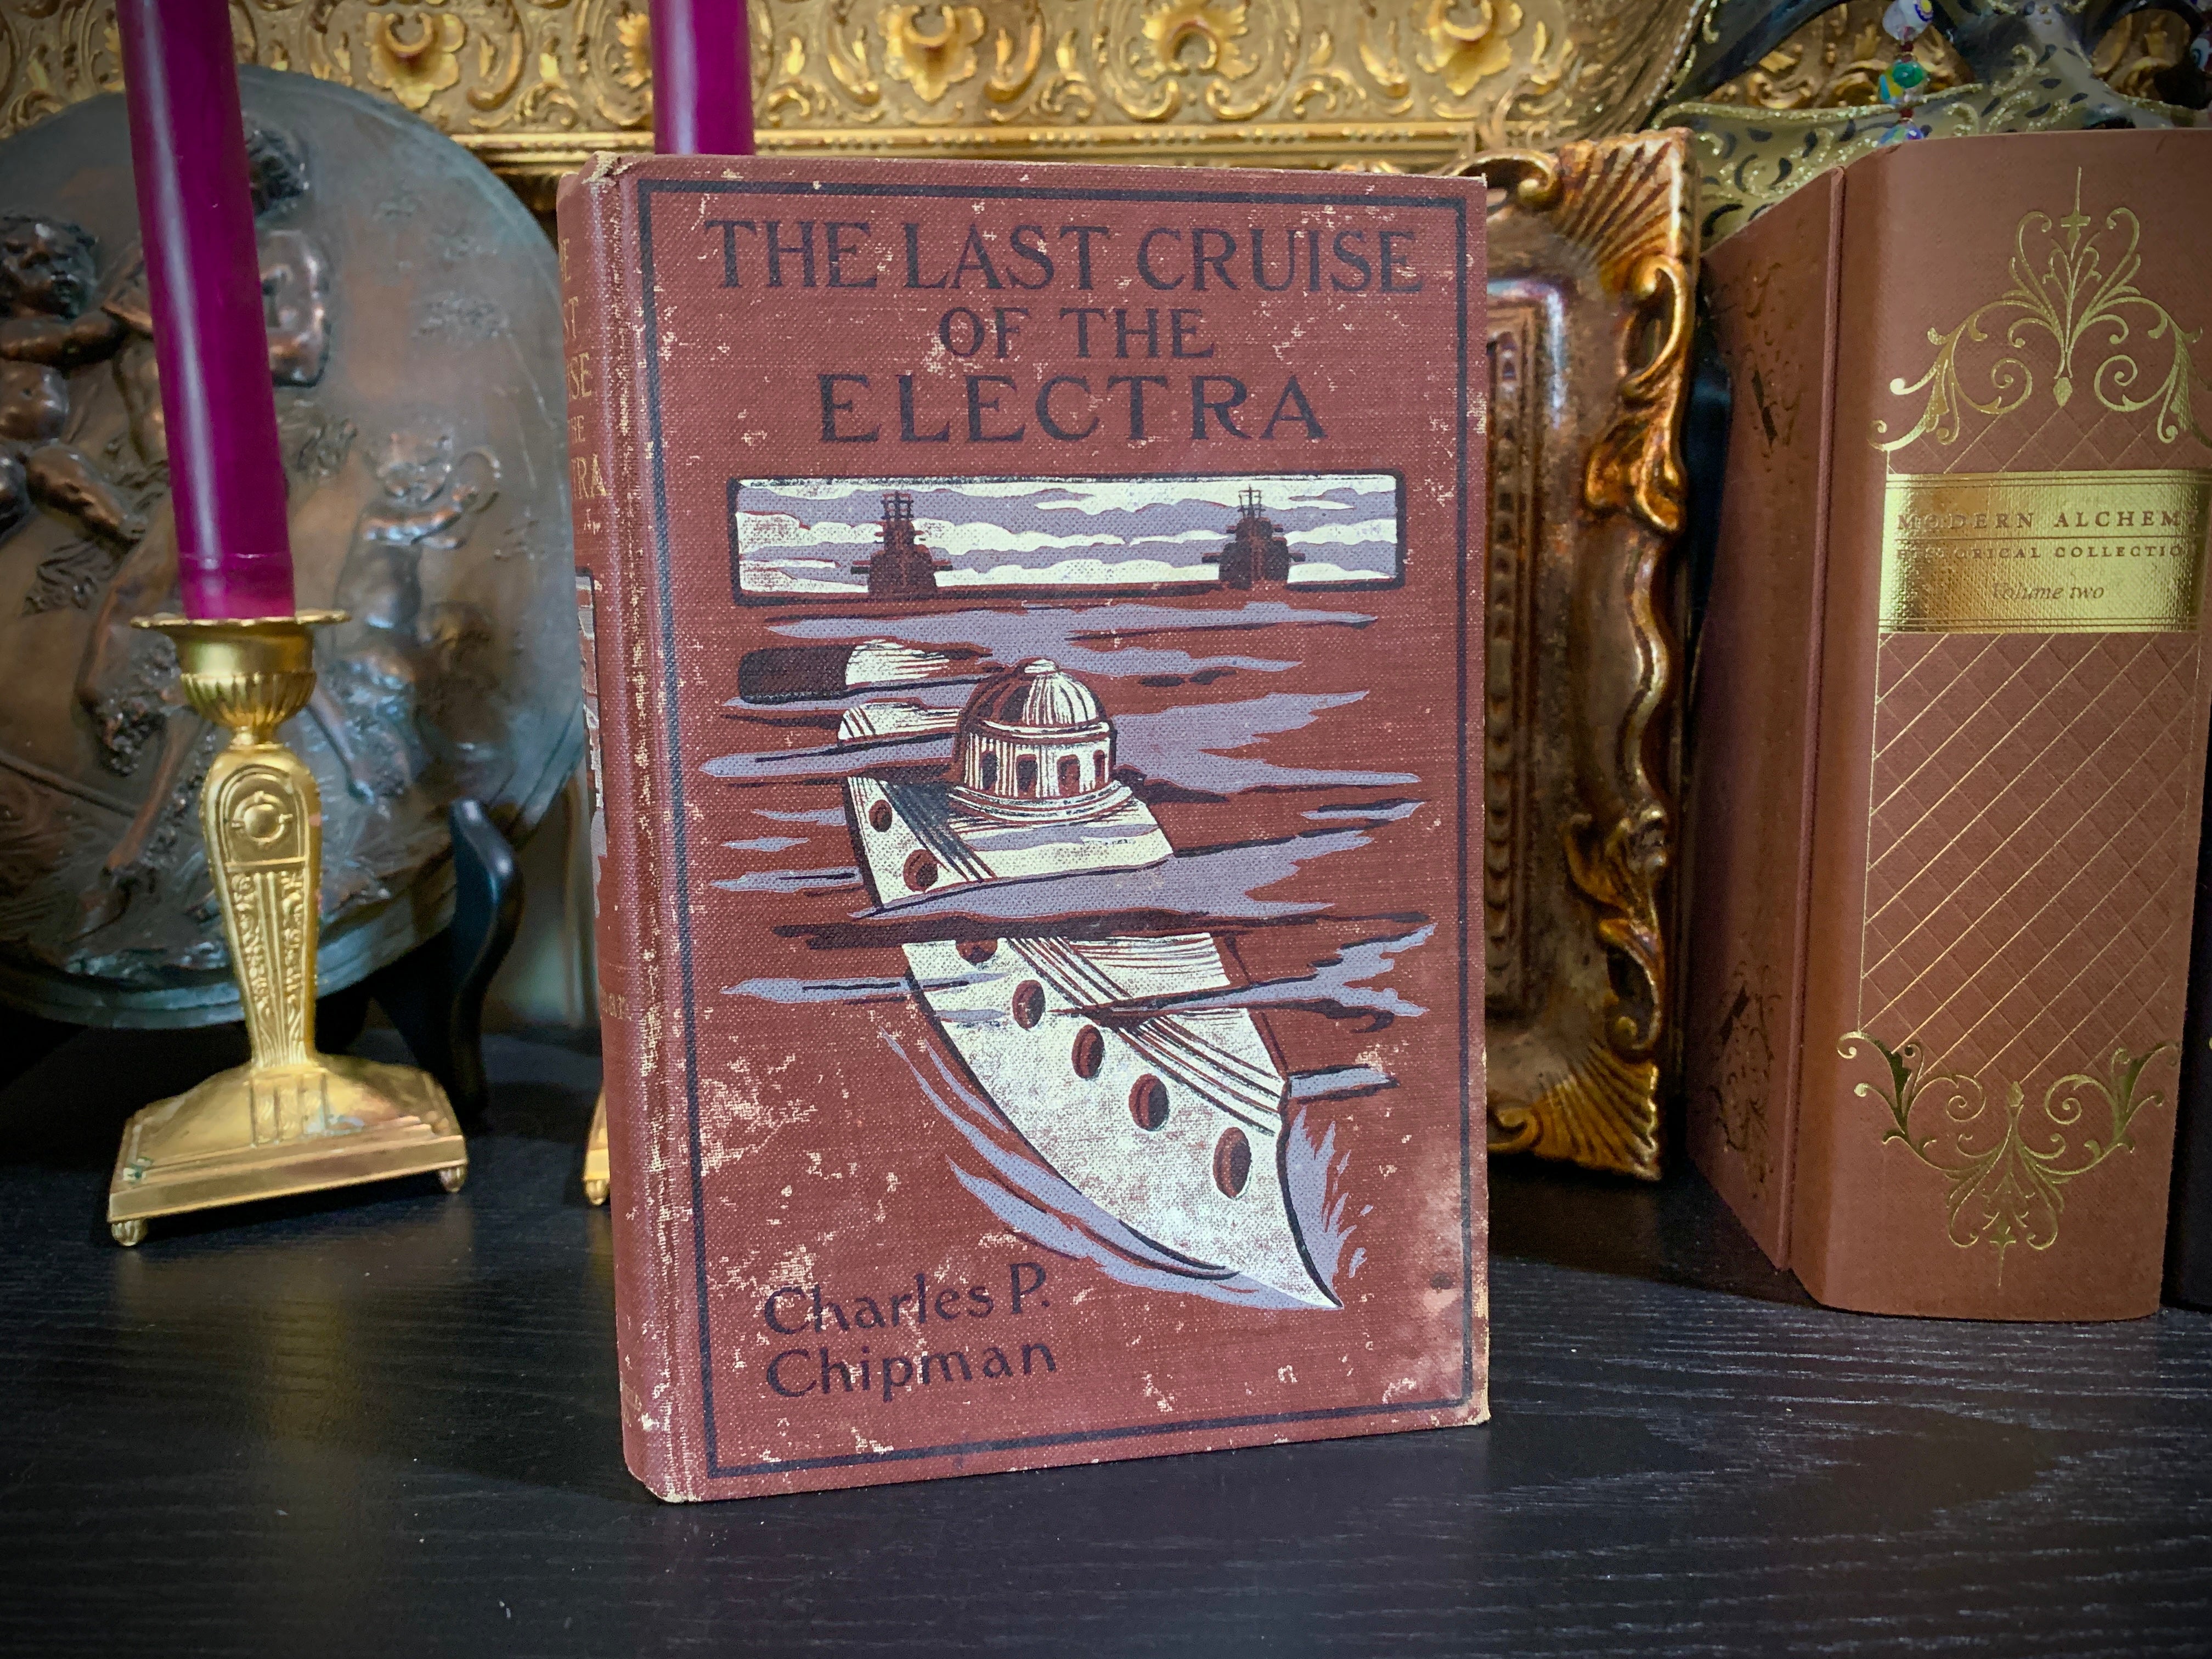 The Last Cruise of the Electra, by Charles Phillips Chipman, Illustrated, 1st Ed, 1902